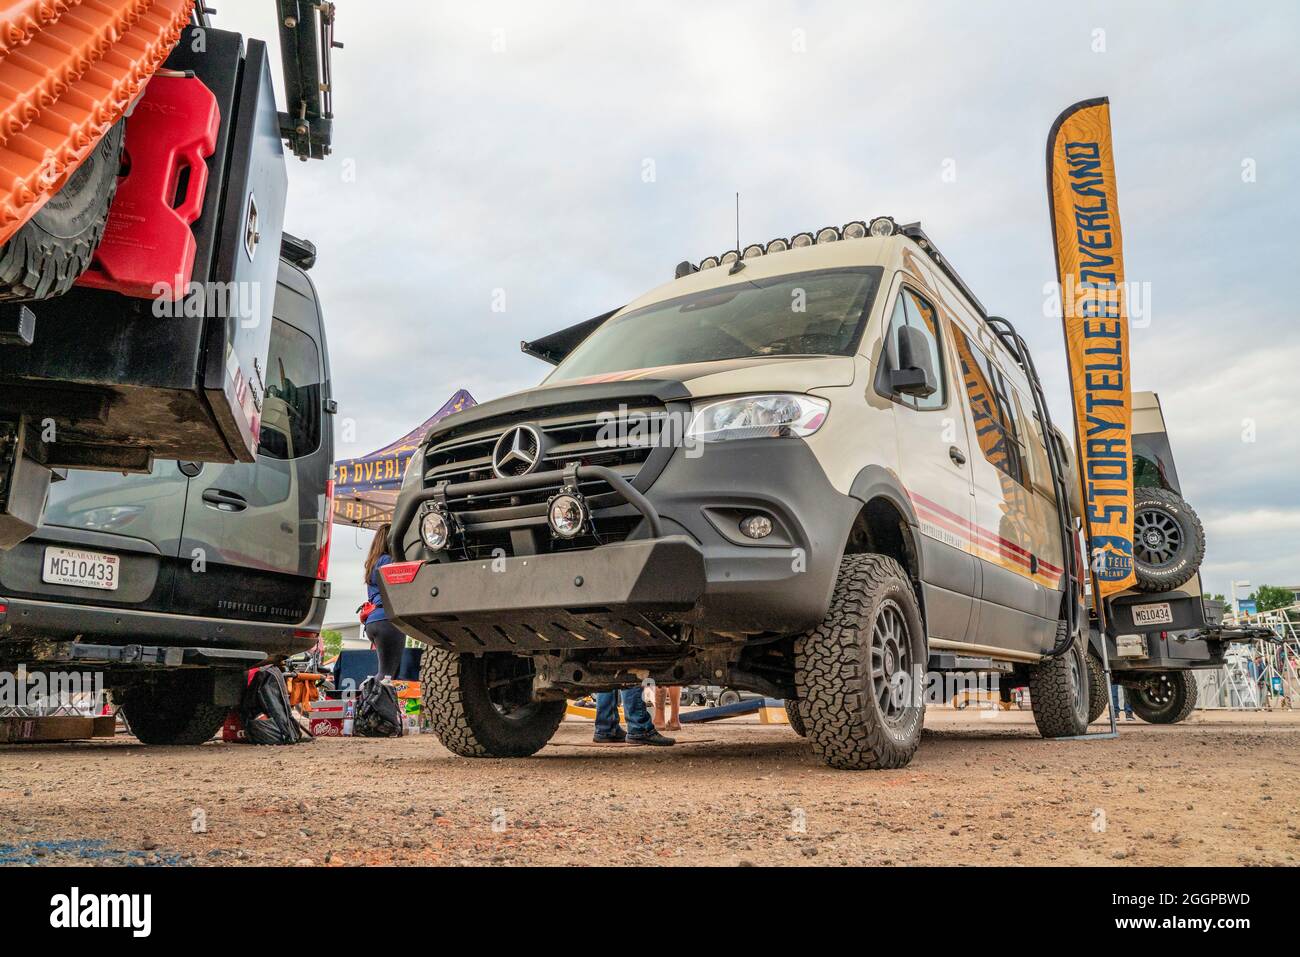 Loveland, CO, USA - August 29, 2021: 4X4 camper van with off-road  capabilities by Storyteller Overland (Beast MODE version) at Overland Expo  Mountain Stock Photo - Alamy